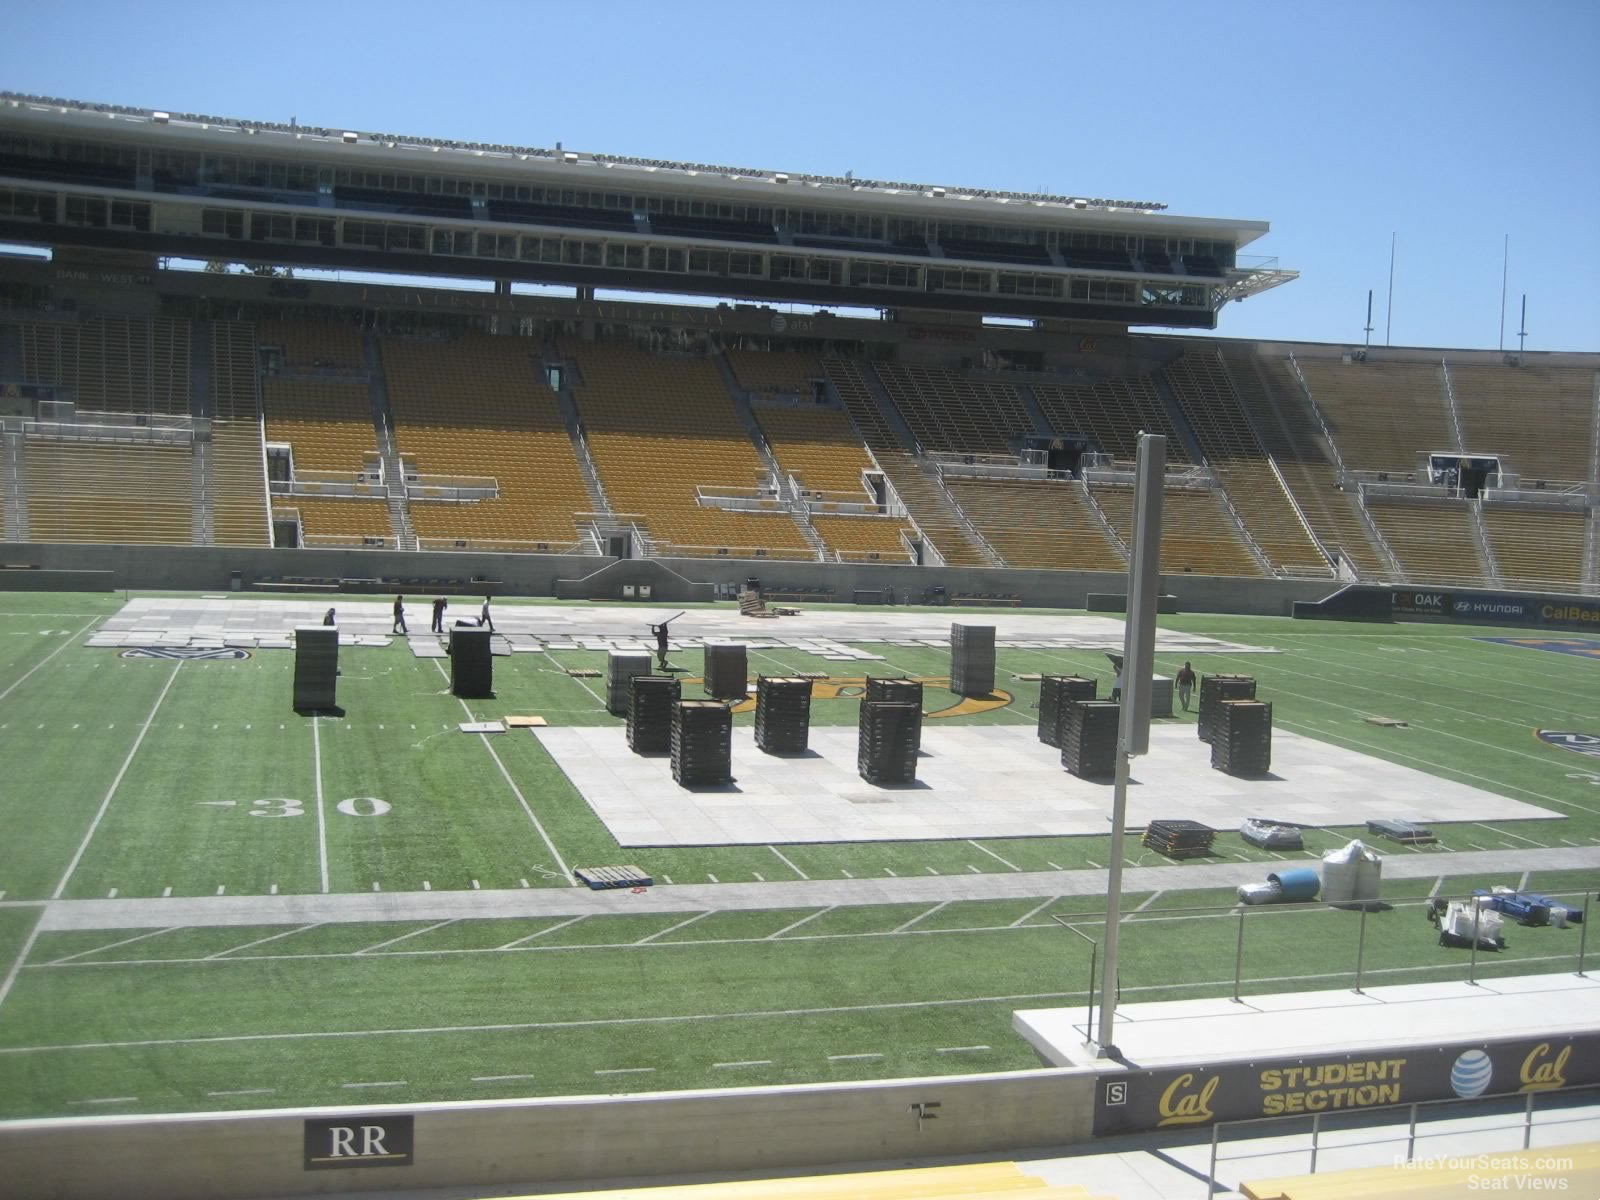 section rr, row 22 seat view  - memorial stadium (cal)